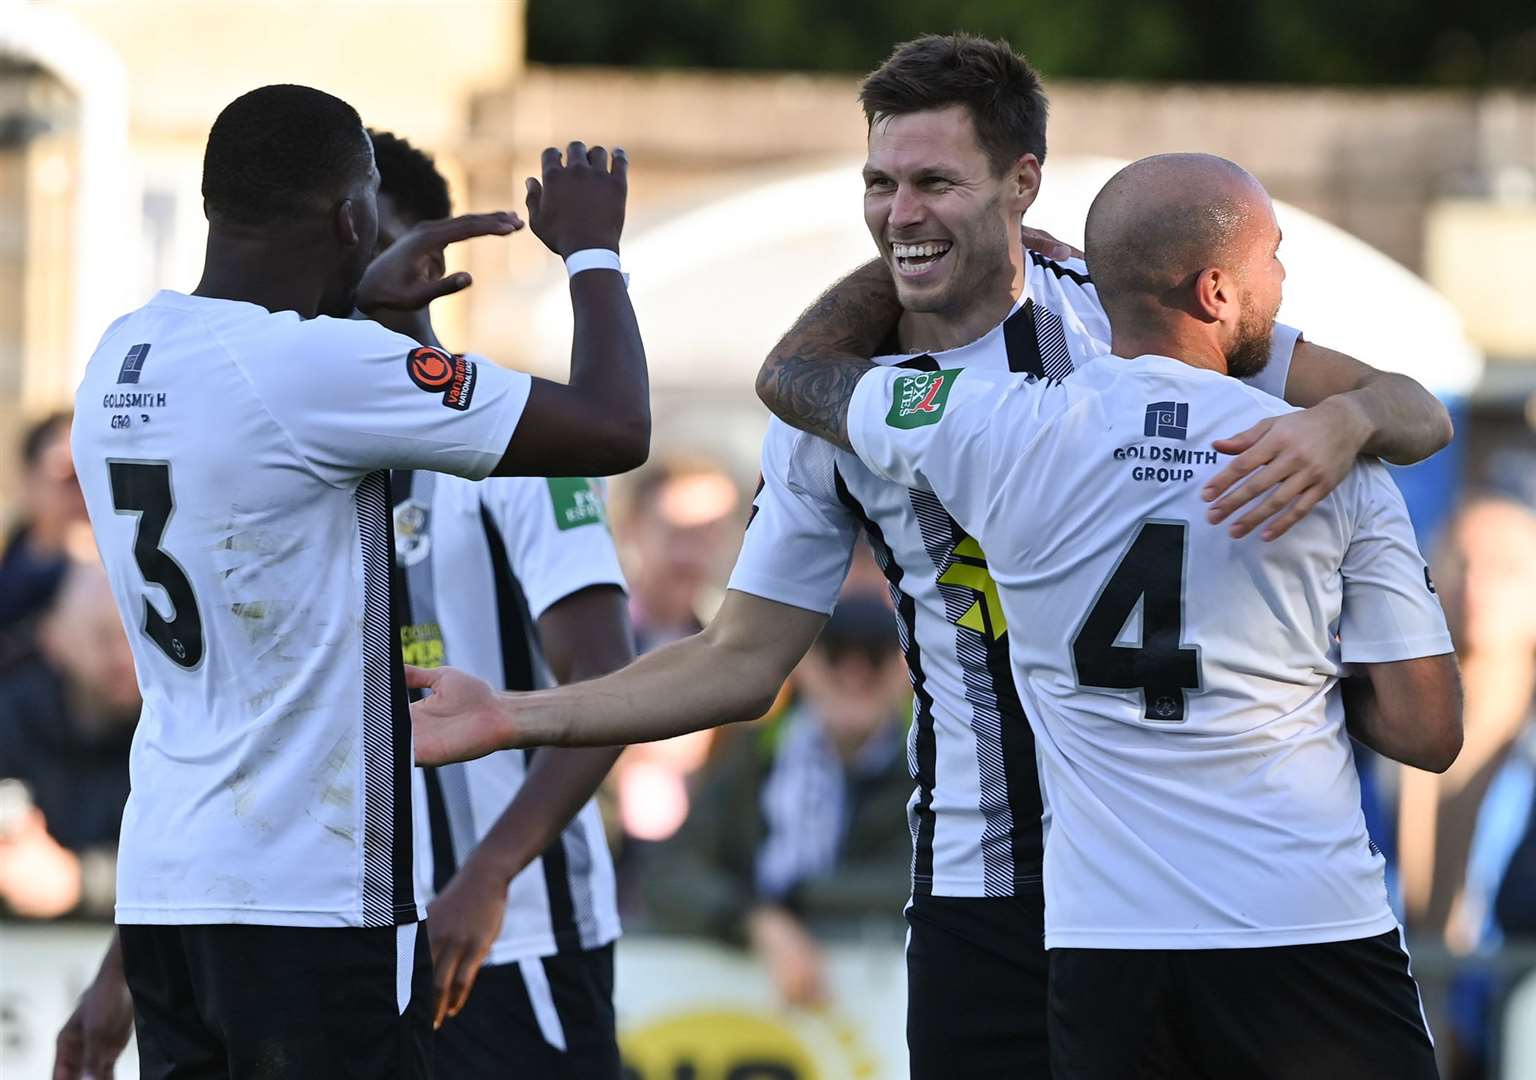 Dartford’s consistency this season has taken them to second in National League South ahead of back-to-back games with Ebbsfleet. Picture: Keith Gillard